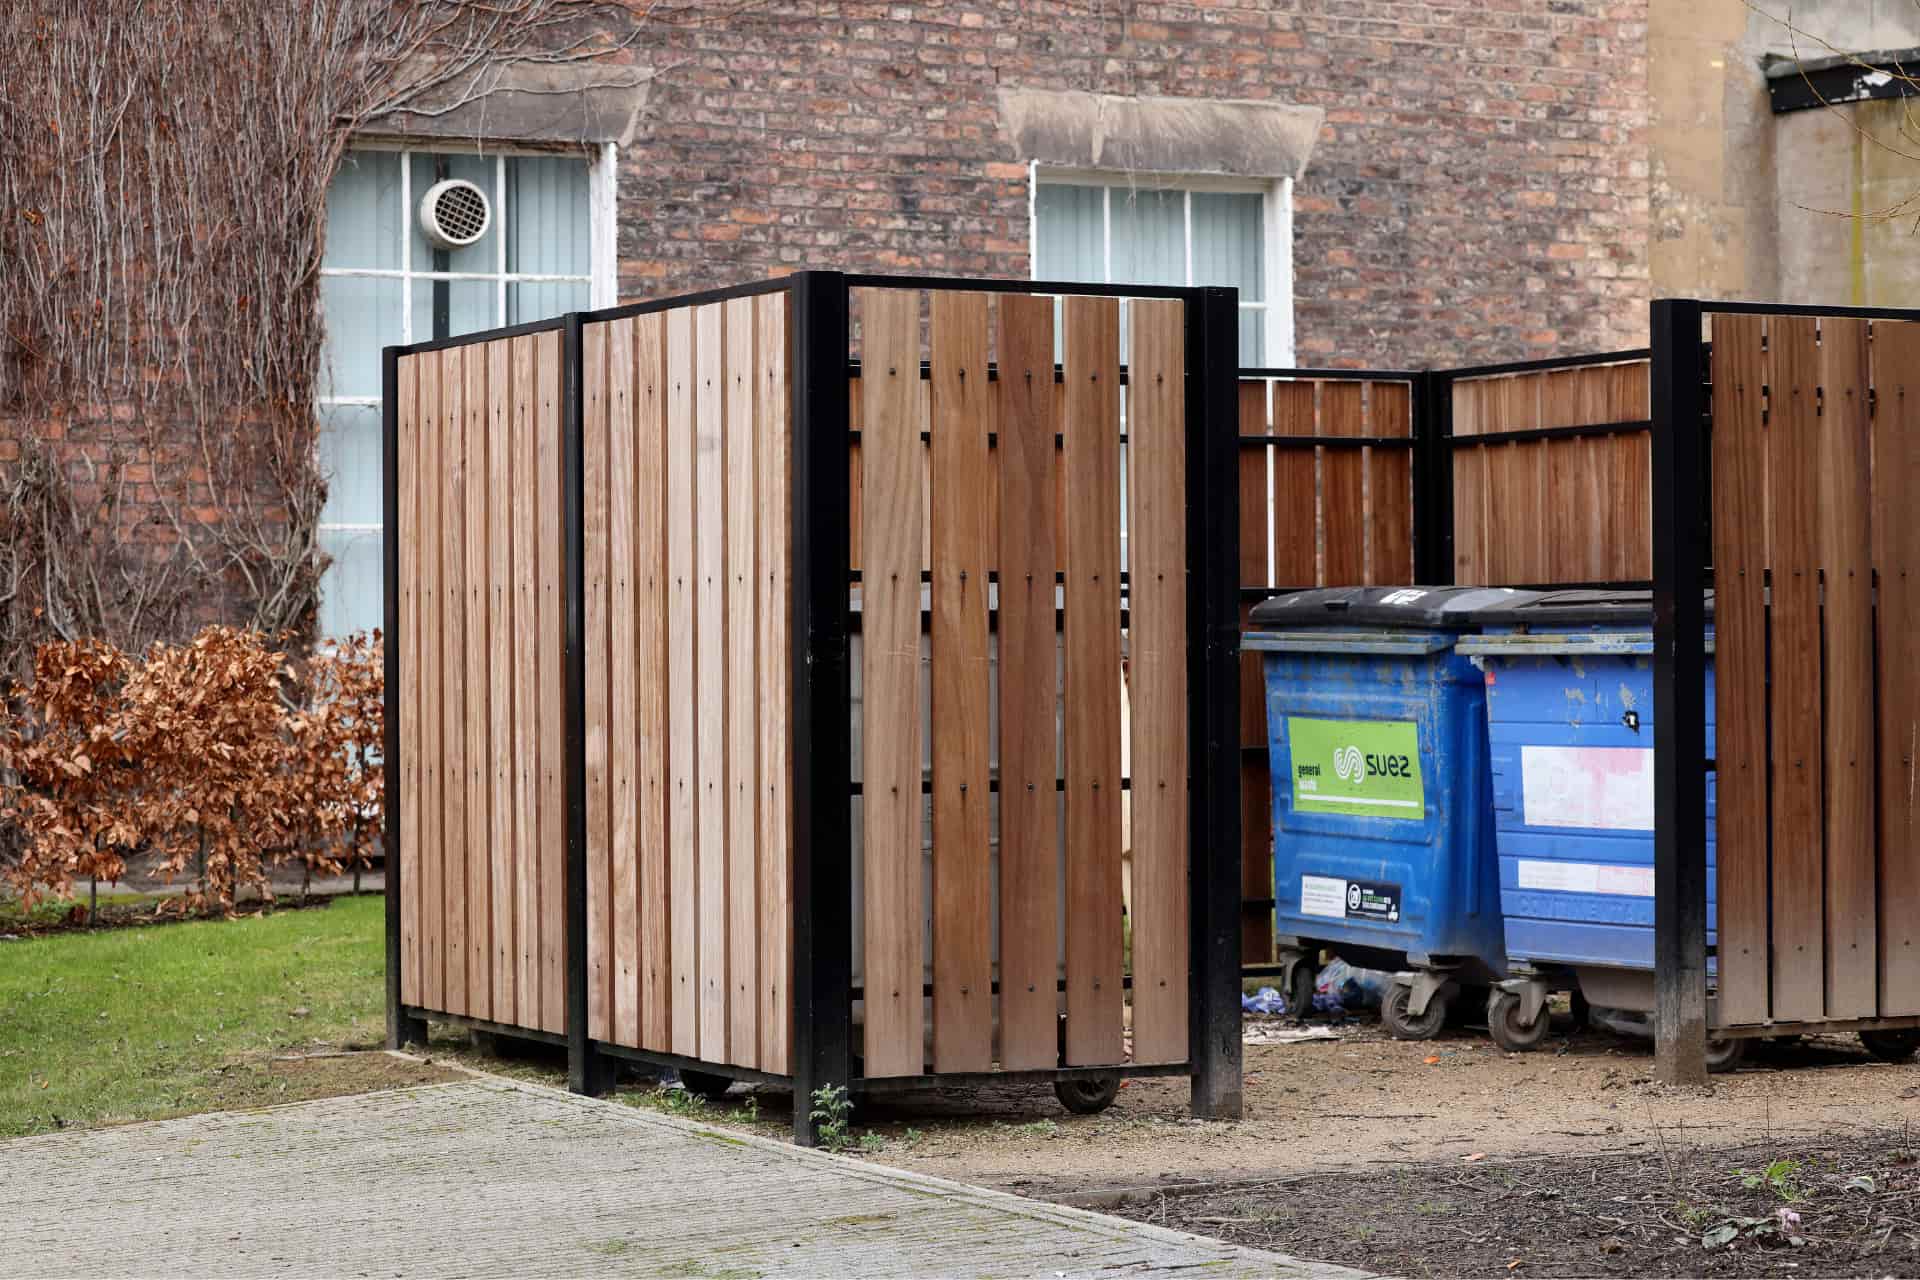 Wooden fencing containing waste bins on campus.